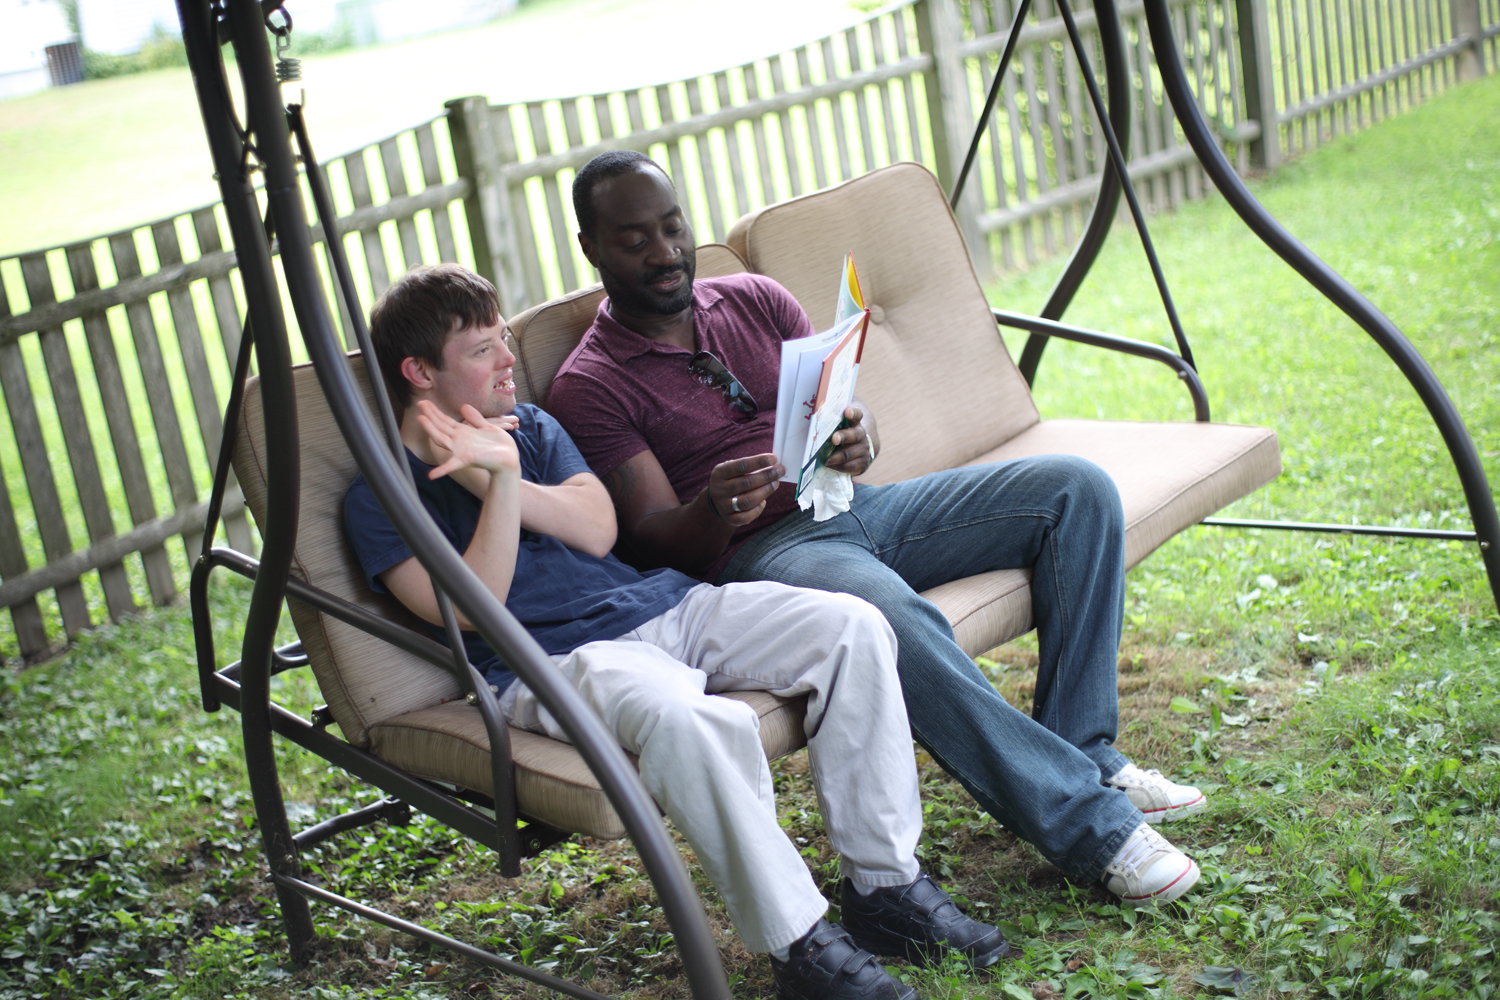 two men on a swing, one with developmental disabilities